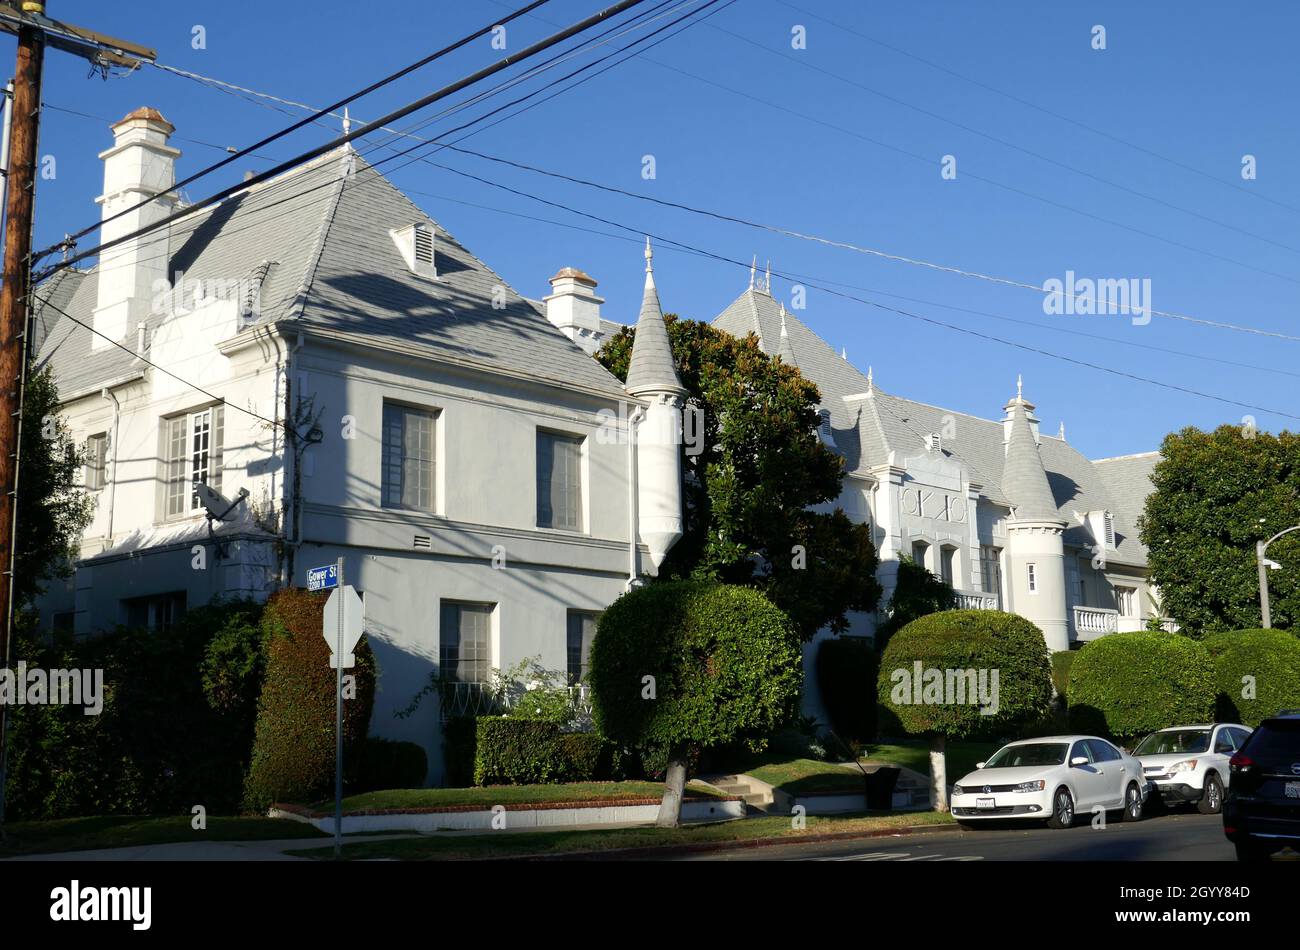 Los Angeles, California, USA 30th September 2021 A general view of atmosphere of Singer Madonna and actor Sean Penn's former home/residence on September 30, 2021 in Los Angeles, California, USA. Photo by Barry King/Alamy Stock Photo Stock Photo